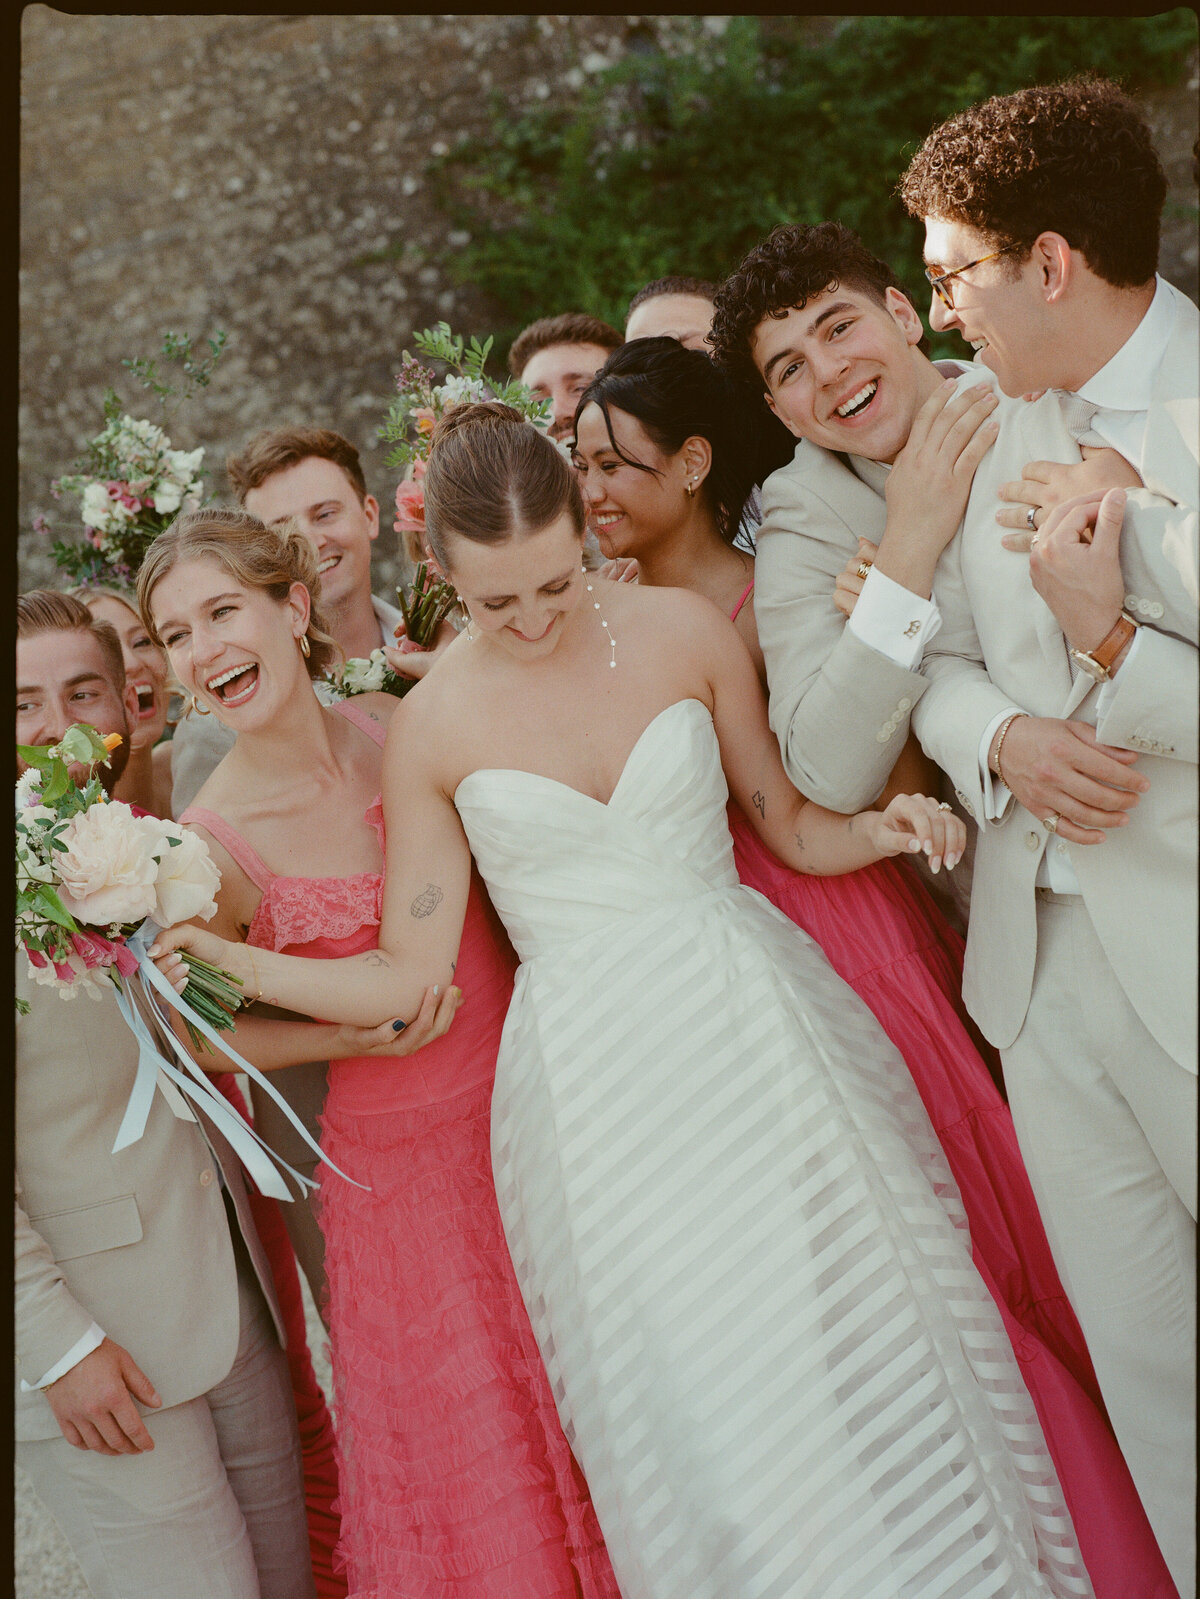 Meredith+Damiano-Villa-Le-Fontanelle-Florence-Italy-Wedding_0021